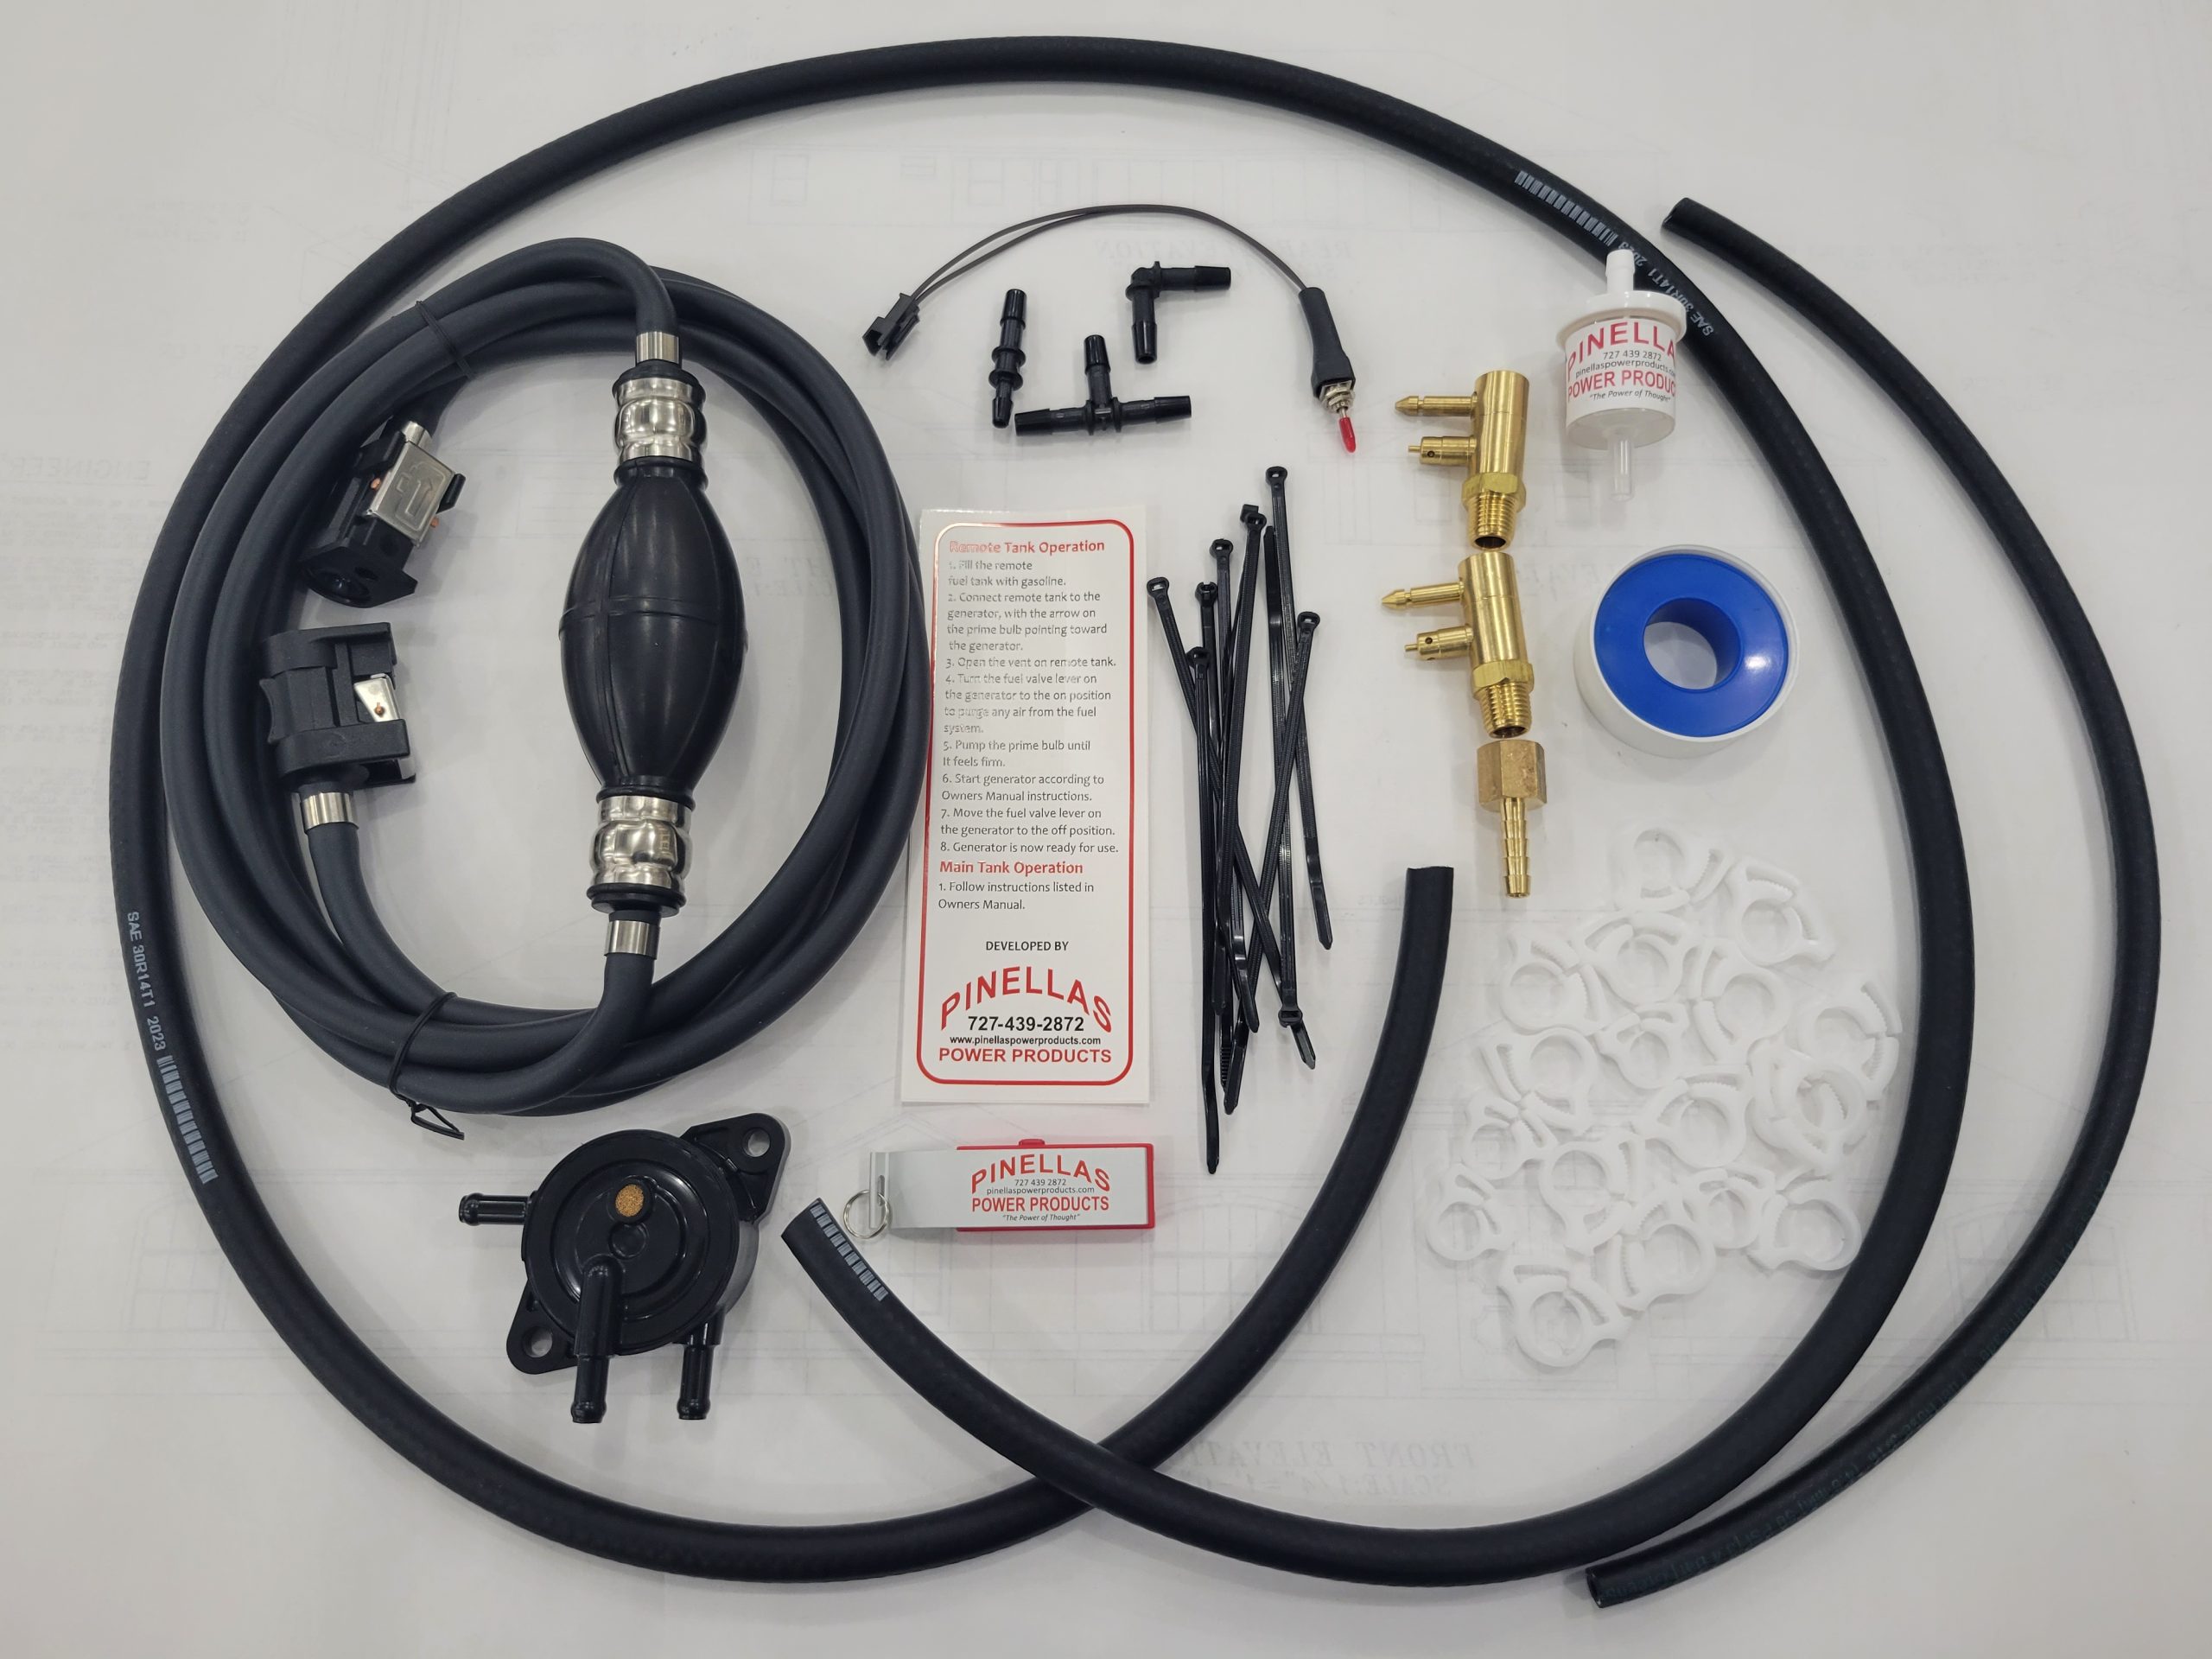 Craftsman 3300i Extended Run Time Fuel Kit with Internal fuel pump